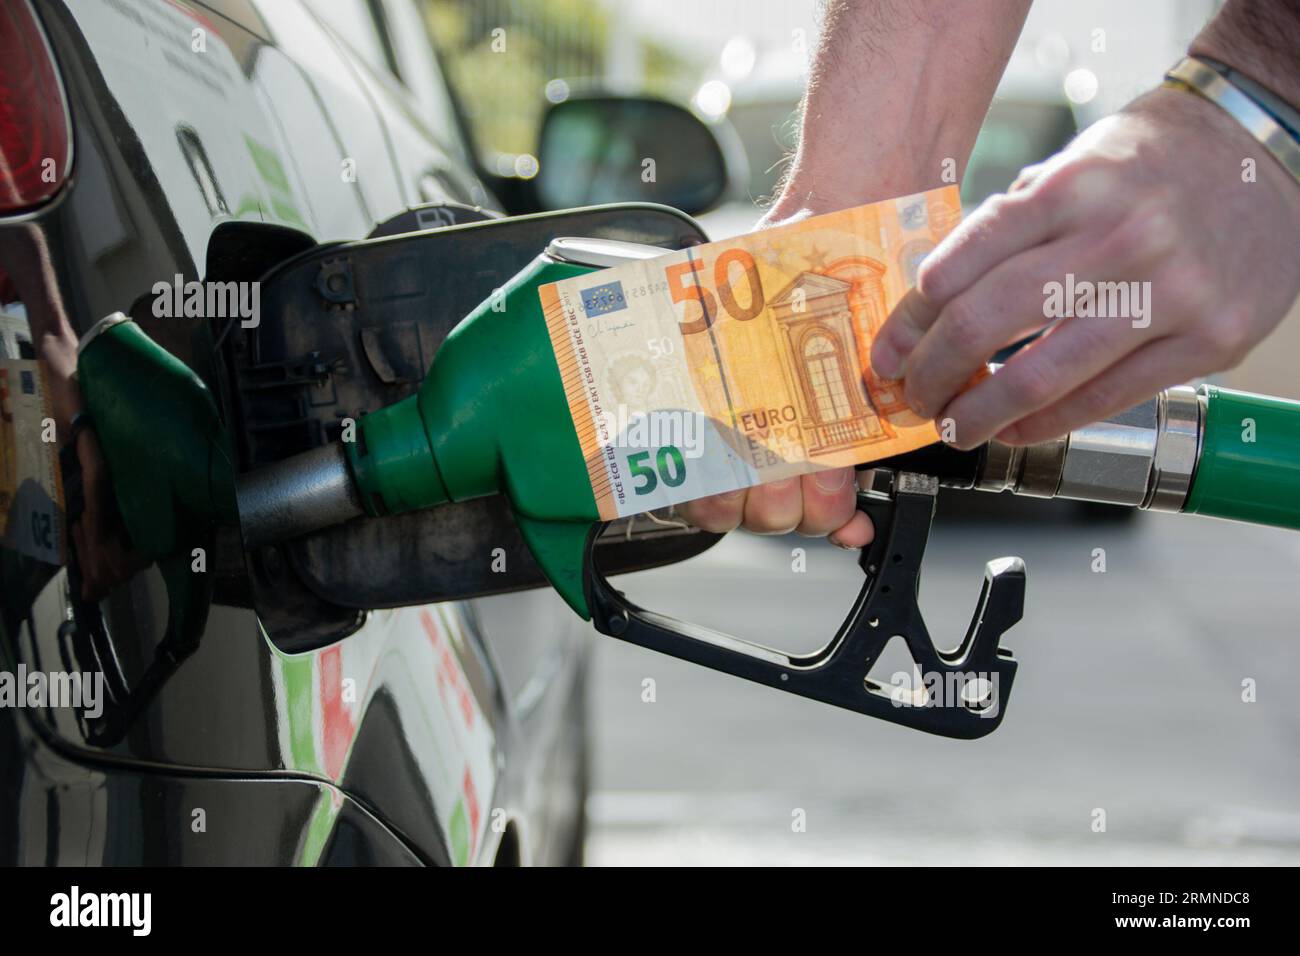 The hands of a man refueling his car holding a 50 euro banknote. Concept of rising cost of living Stock Photo